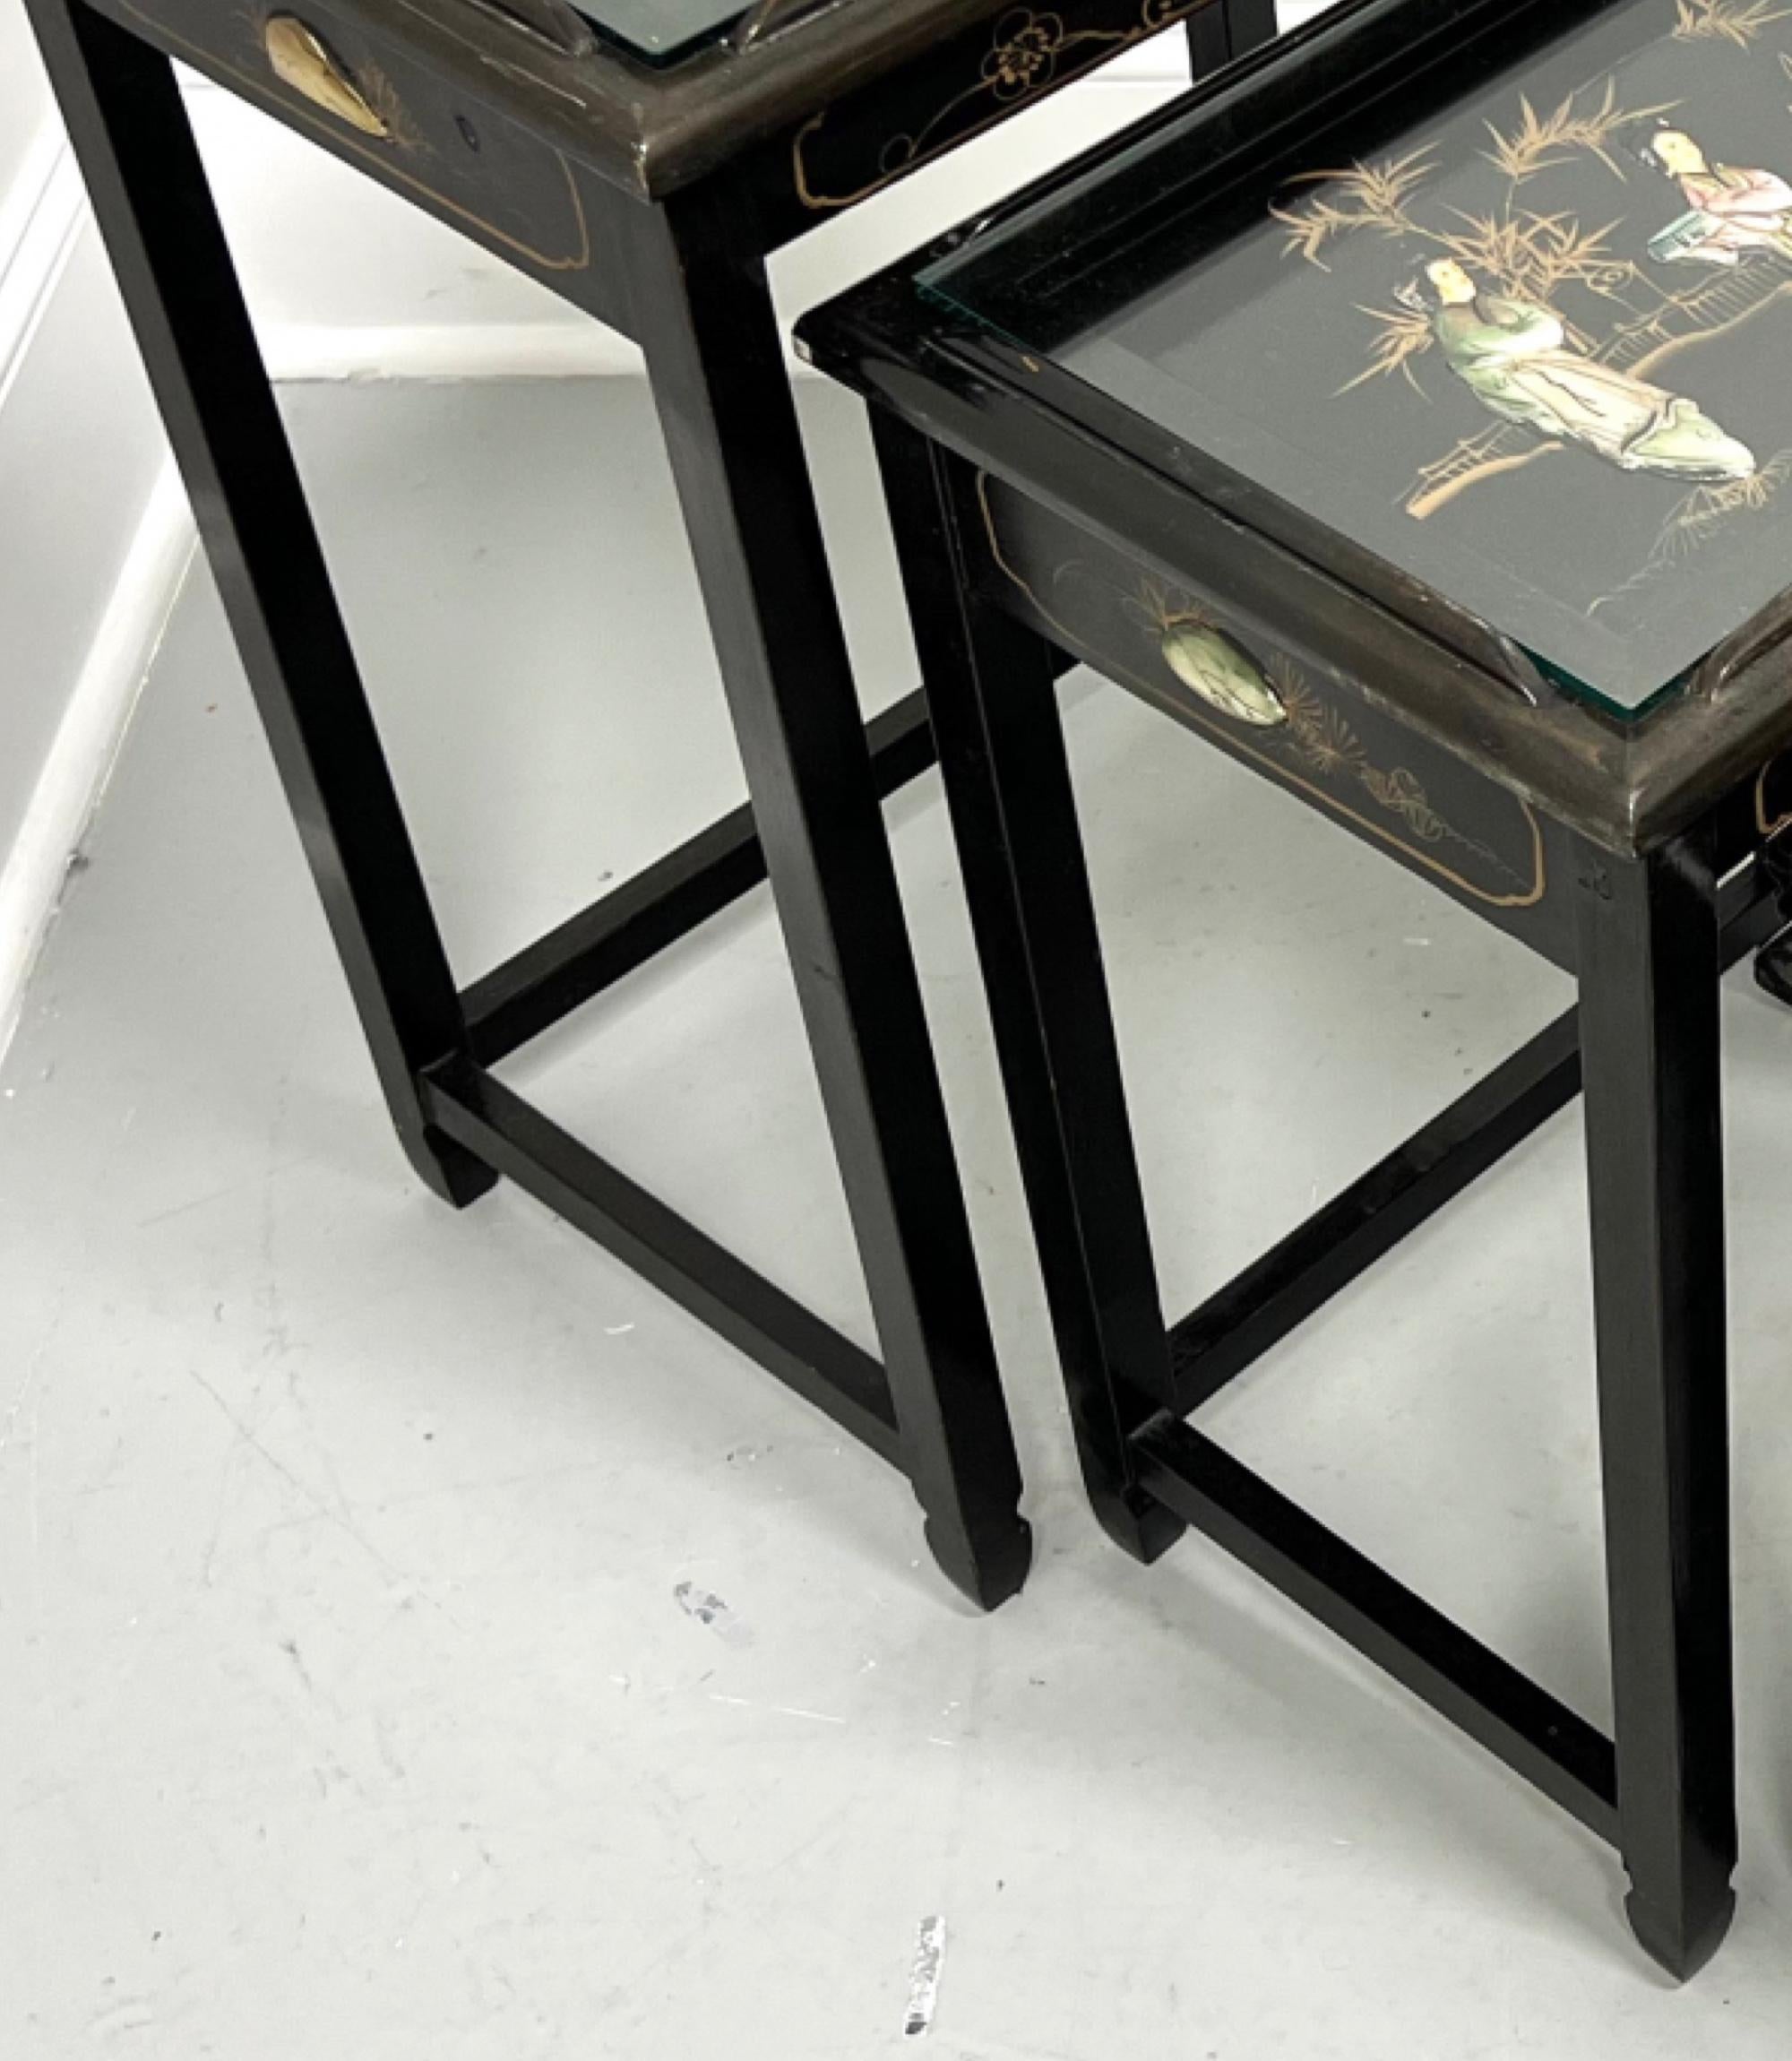 1980's Chinese Export Black Lacquer Hand Painted Nesting Tables - Set of 4 For Sale 5